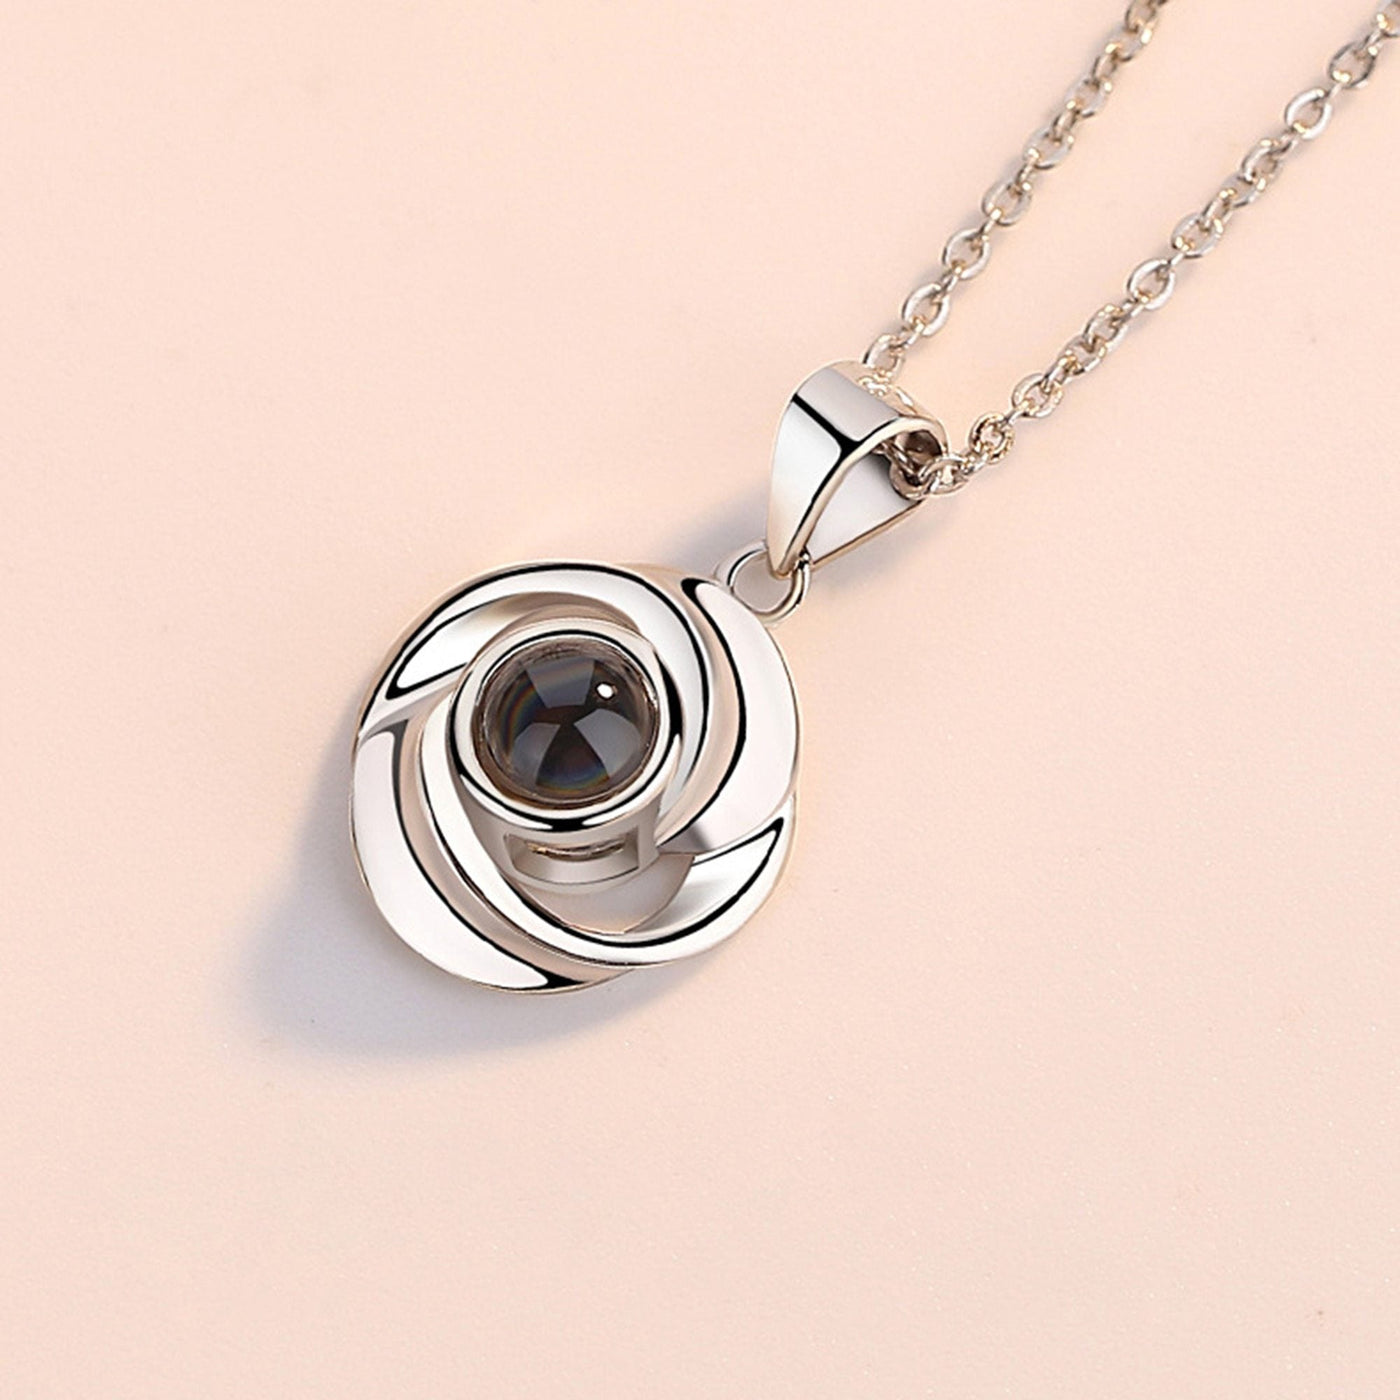 Wearitlove™ Personalized Circle Necklace